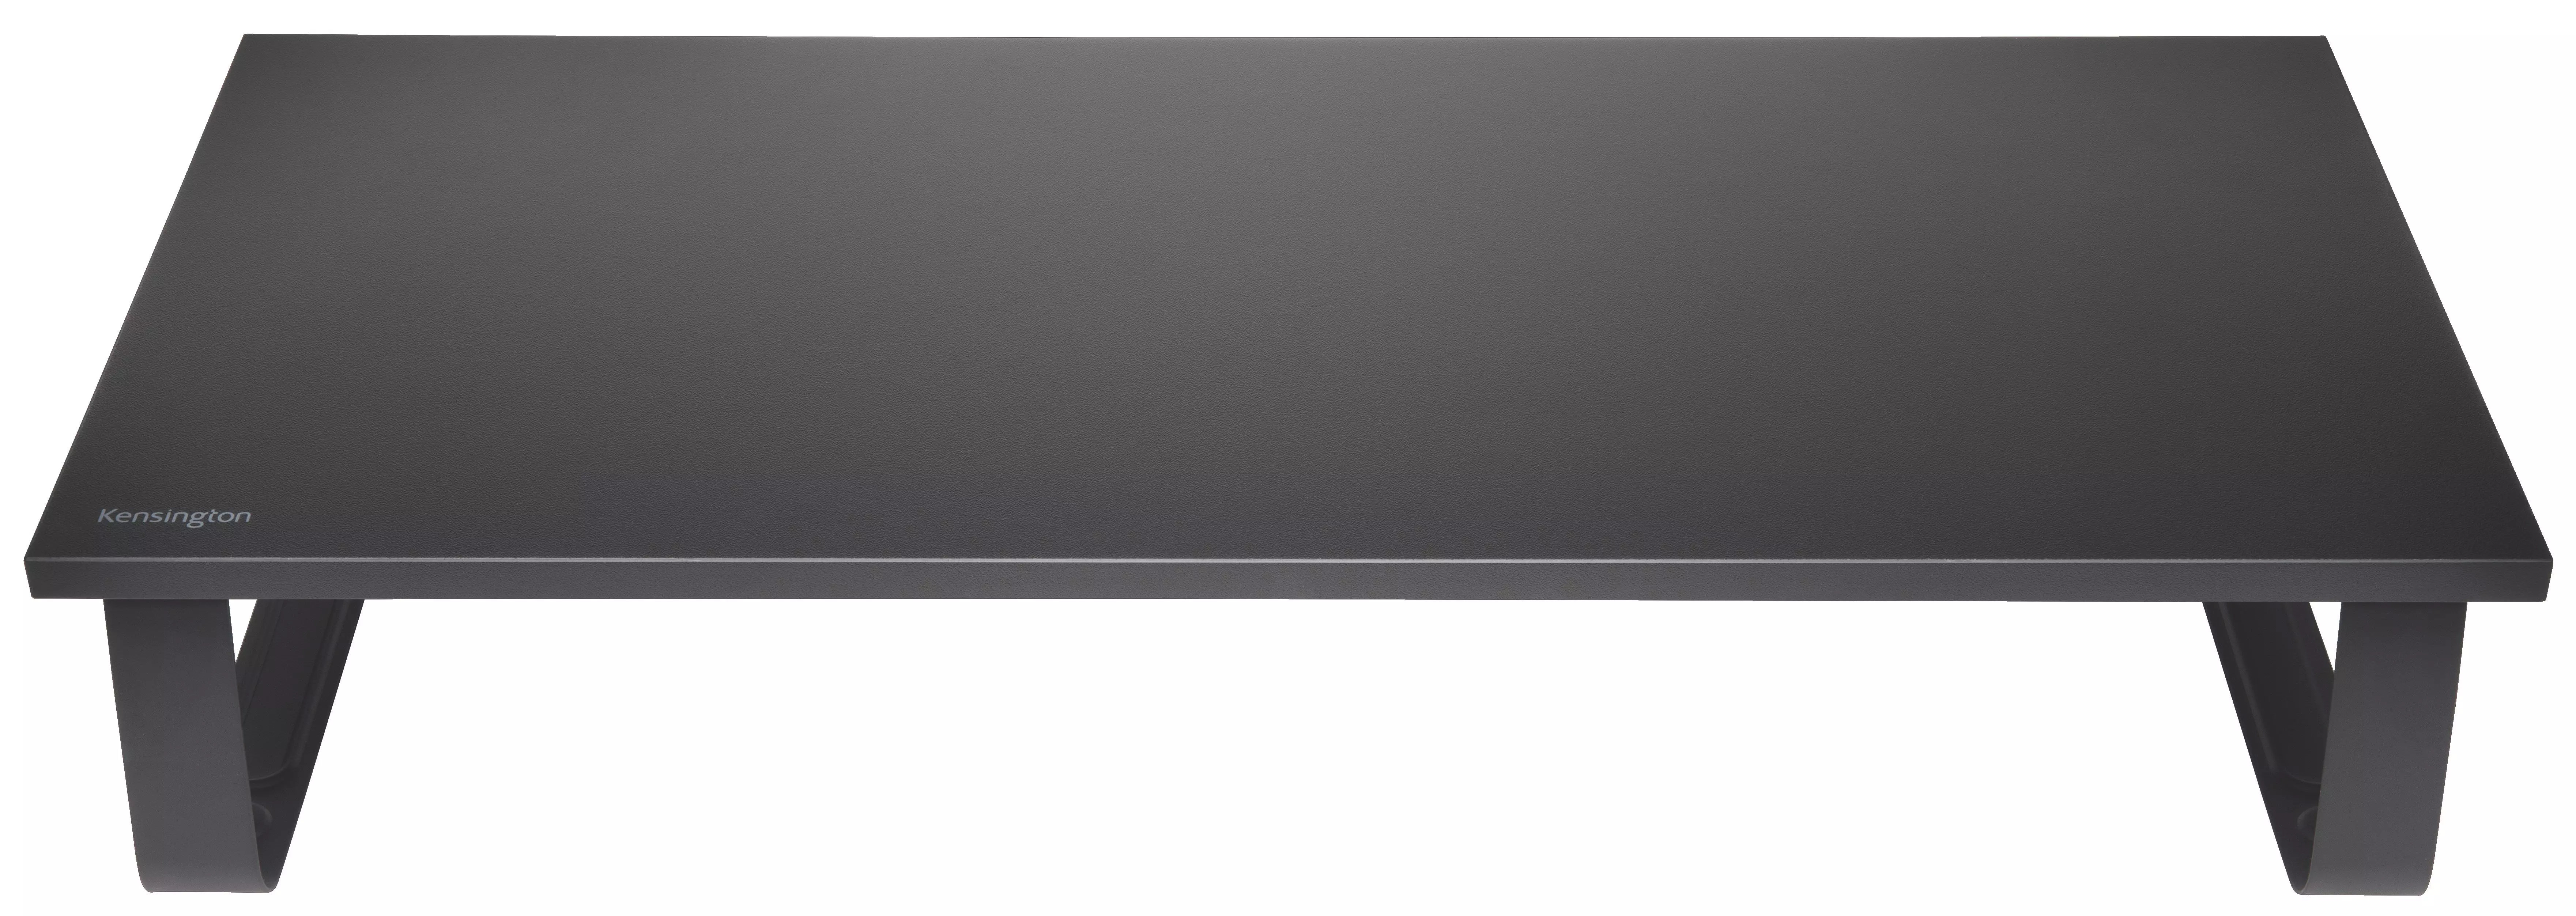 Kensington Monitor Stand Extra Wide Black